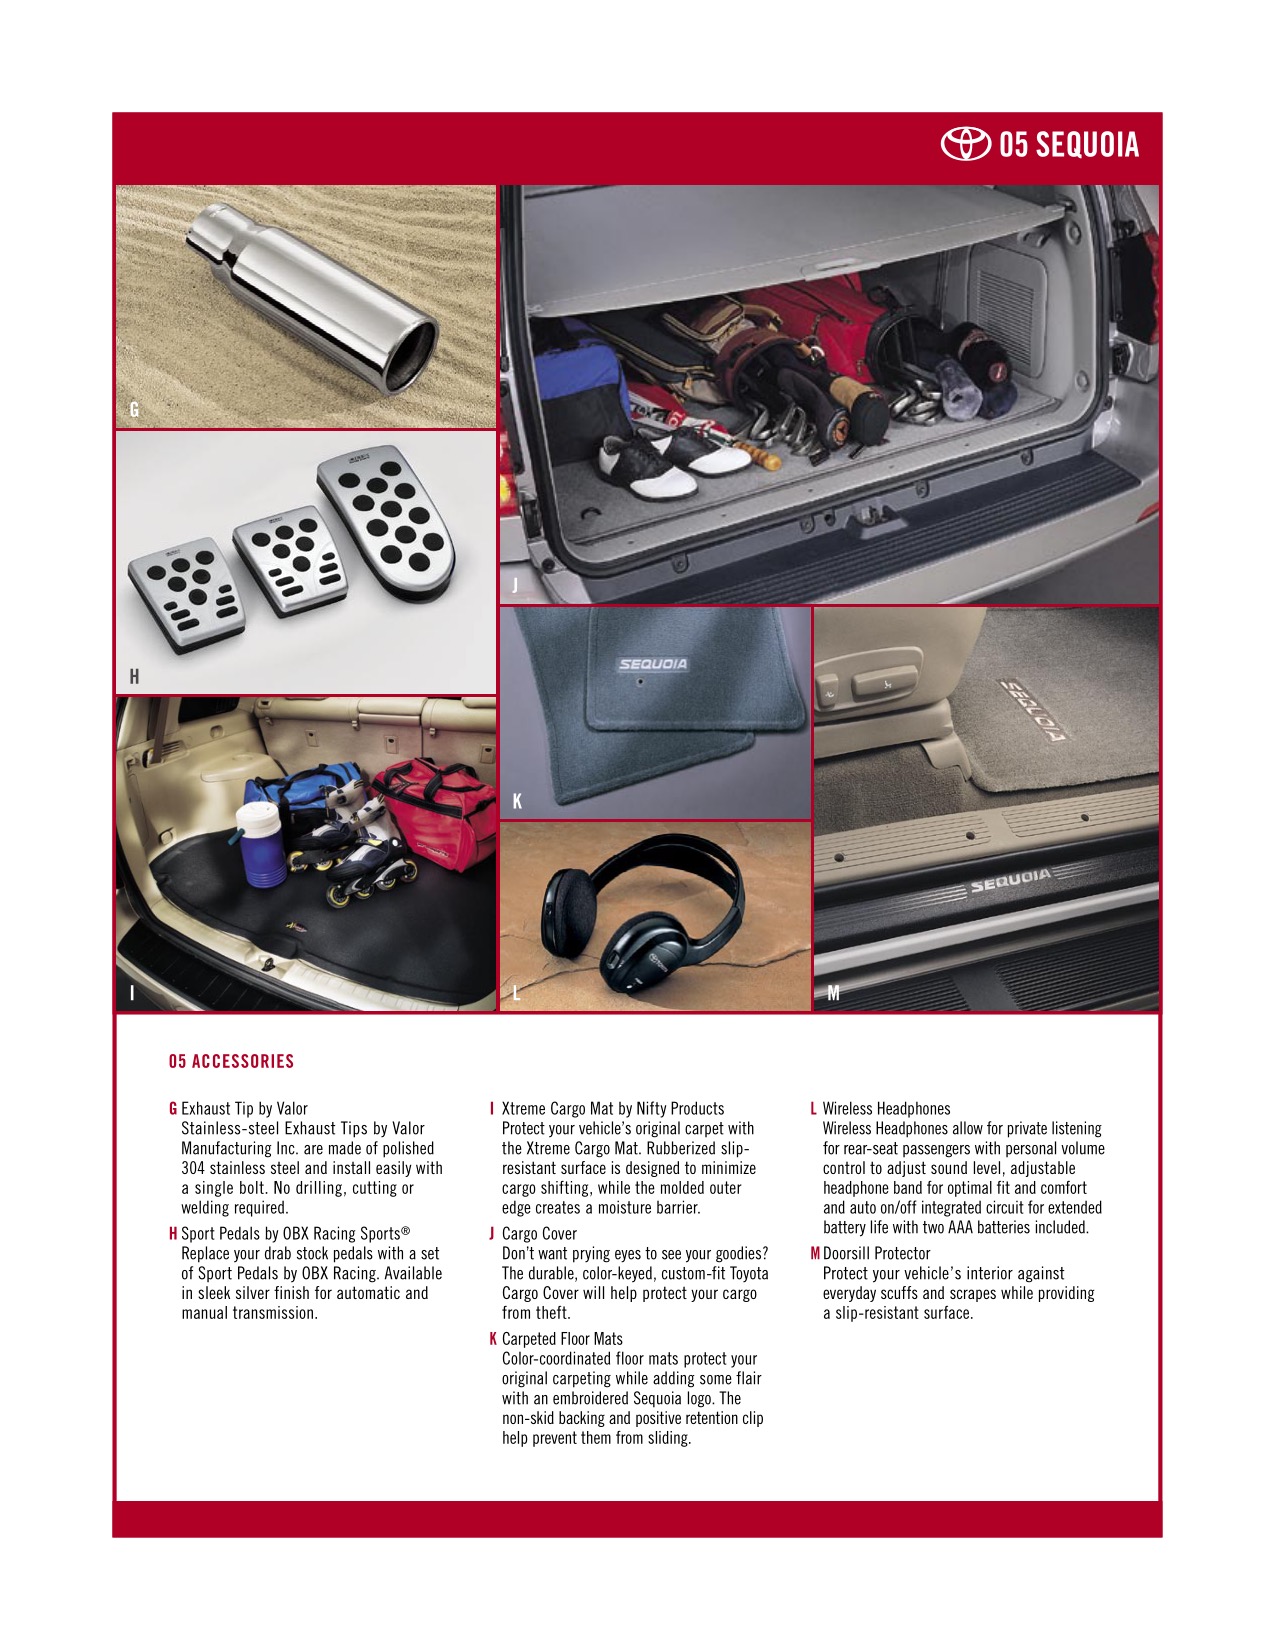 2005 Toyota Sequoia Brochure Page 5